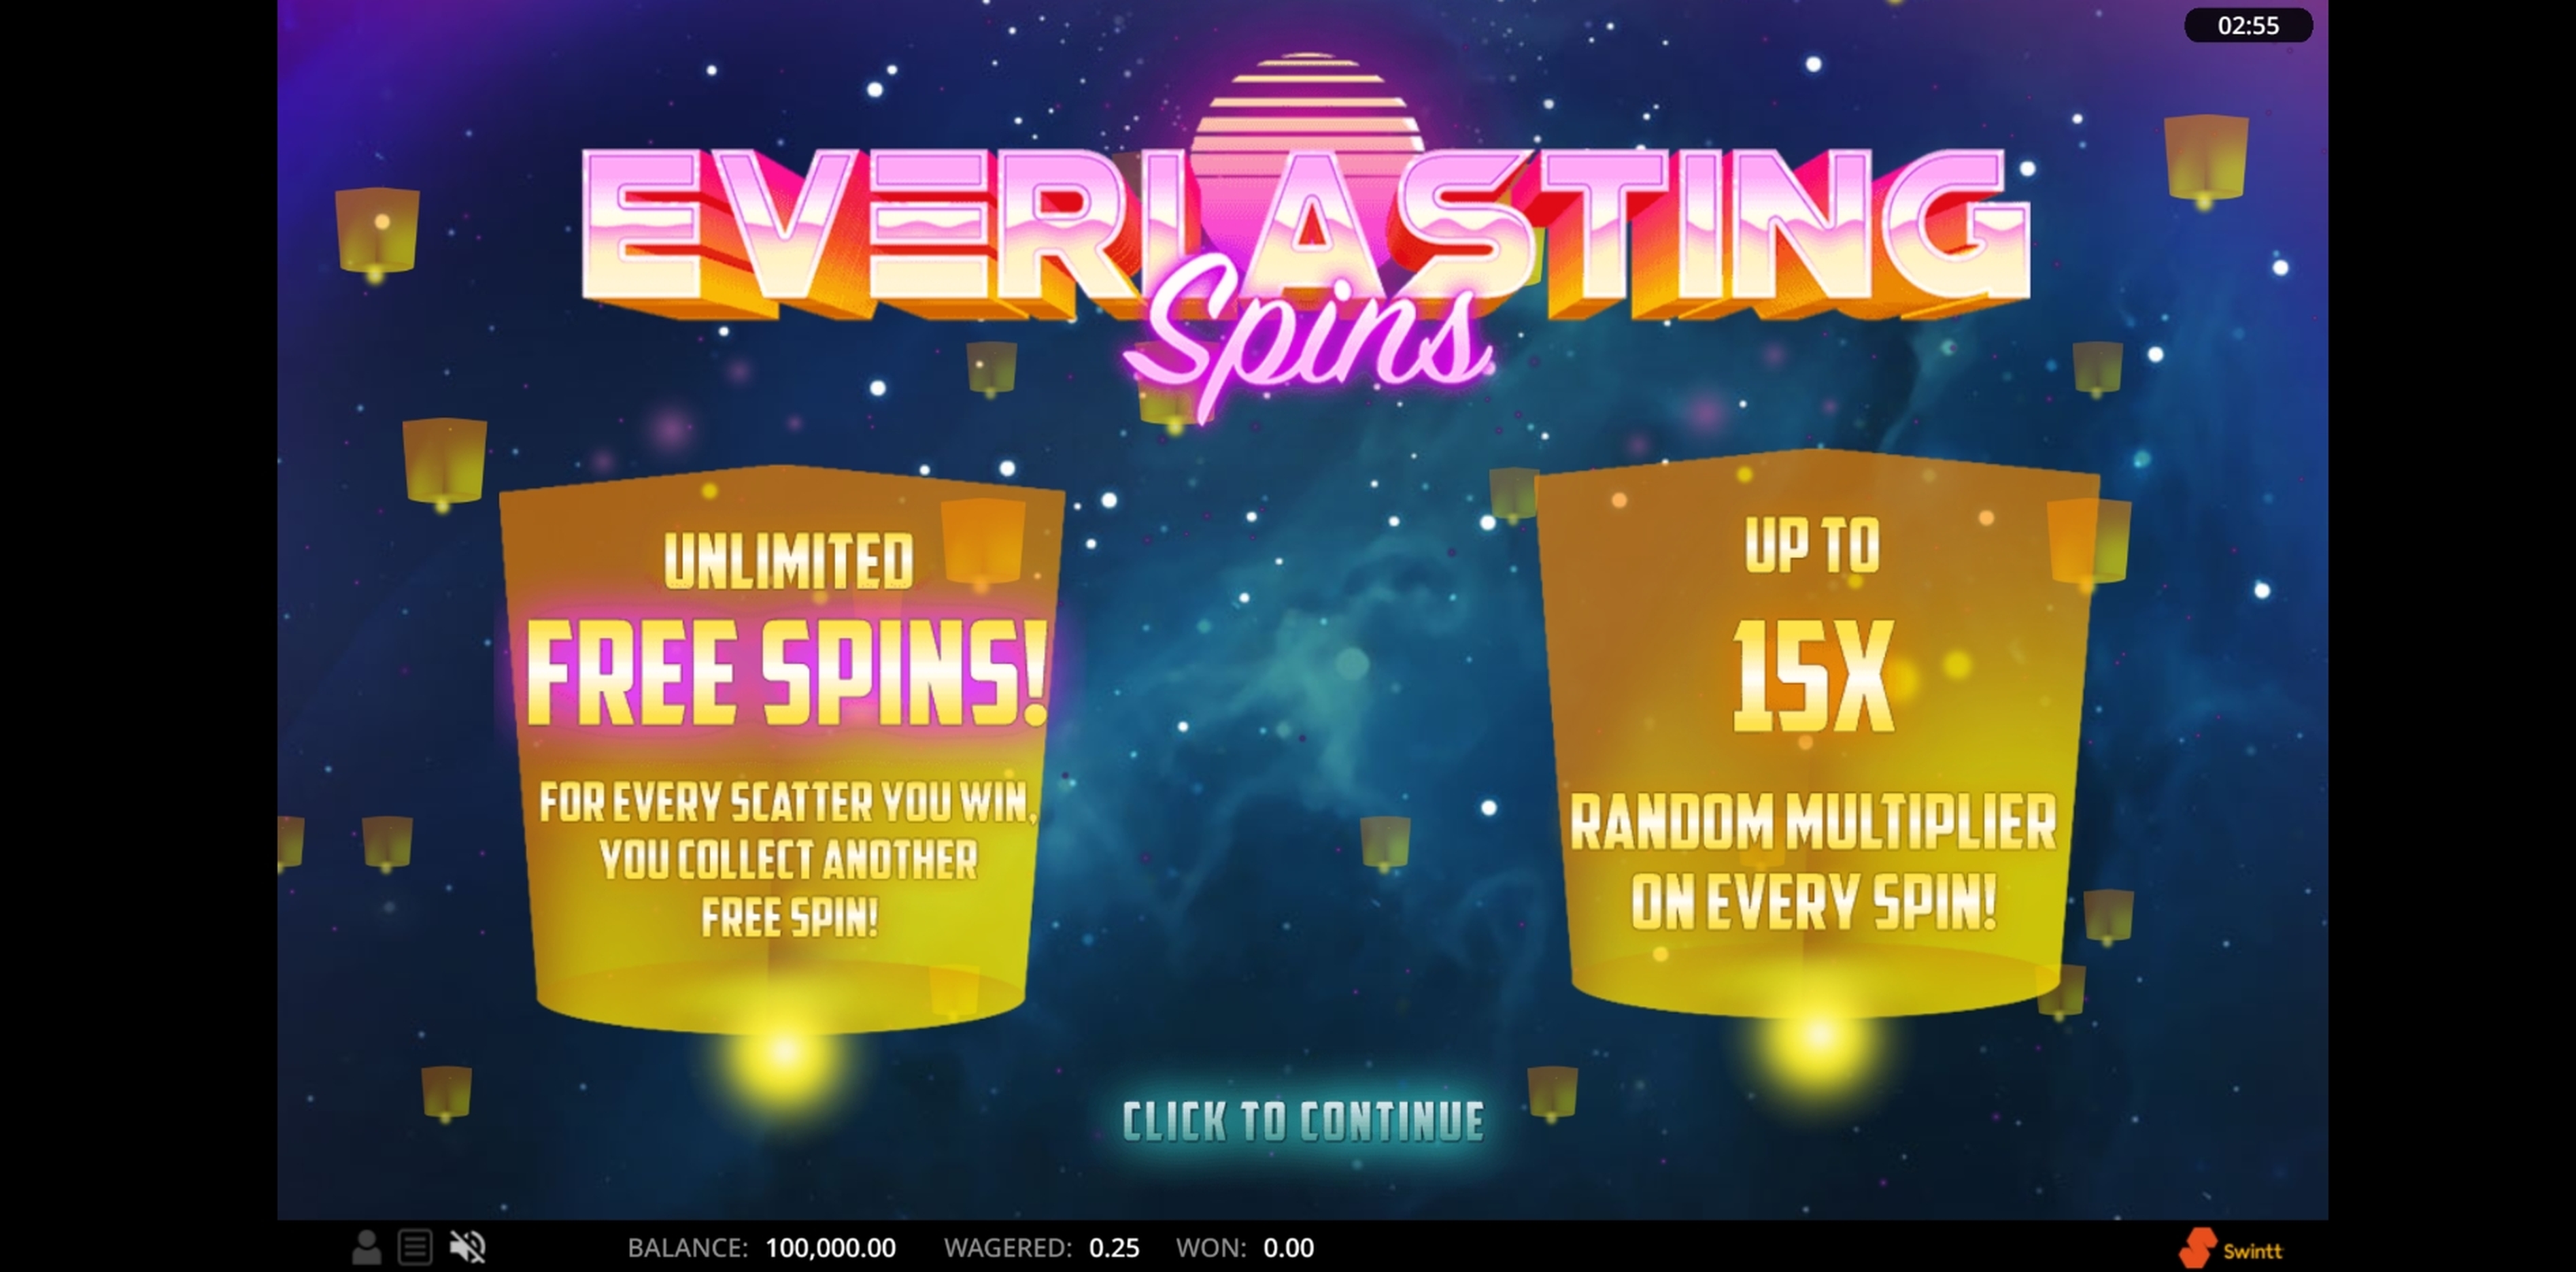 Play Everlasting Spins Free Casino Slot Game by Swintt